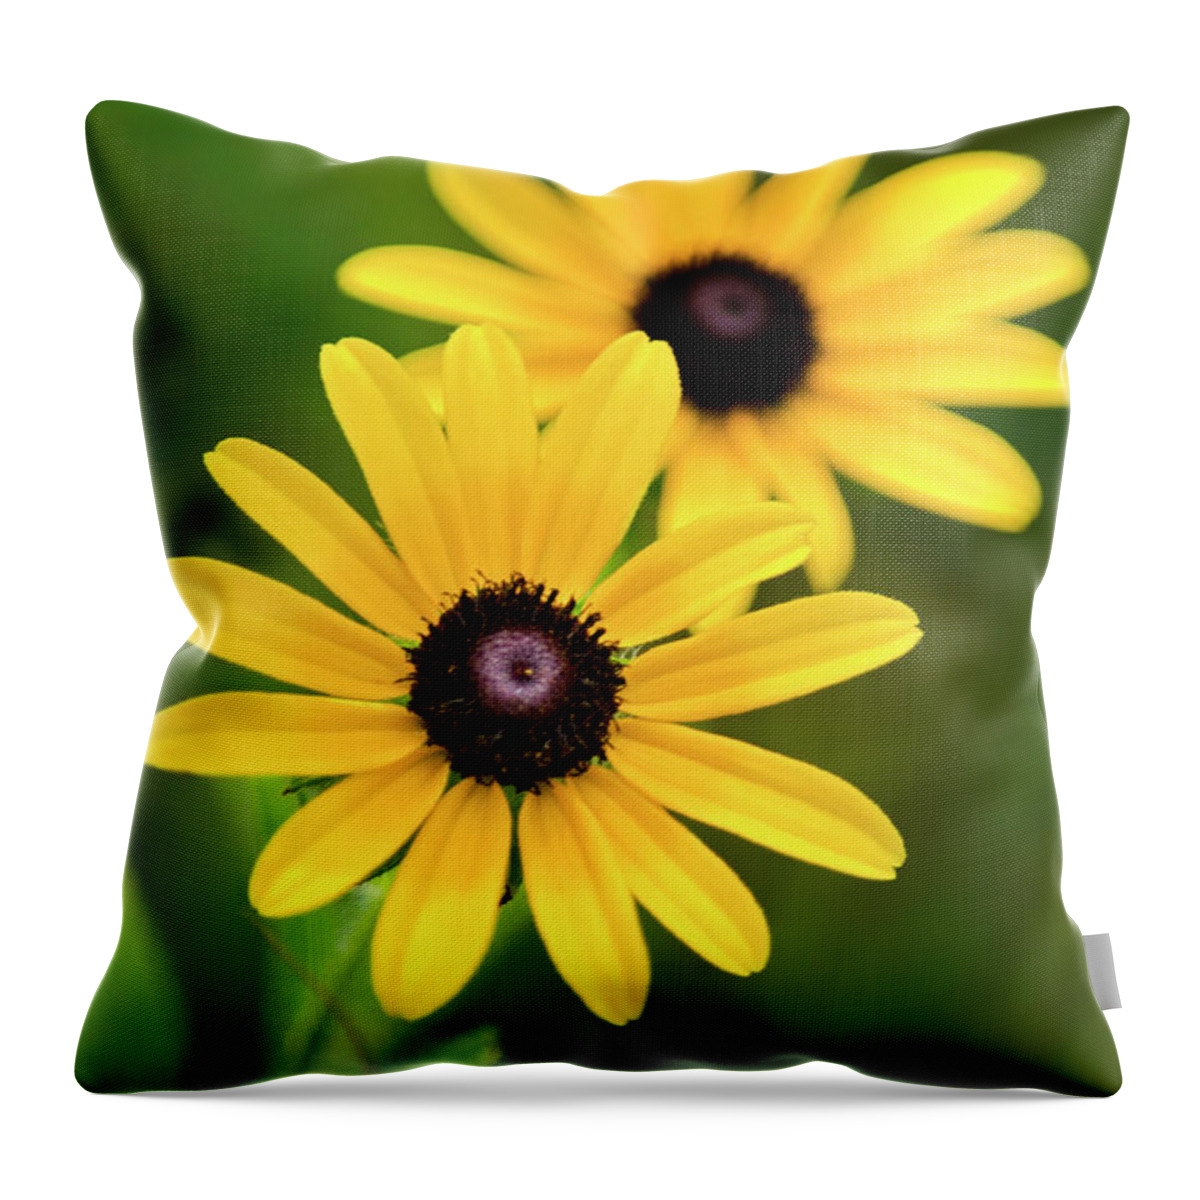 Black Eyed Susan Throw Pillow featuring the photograph Black Eyed Susans by Christina Rollo